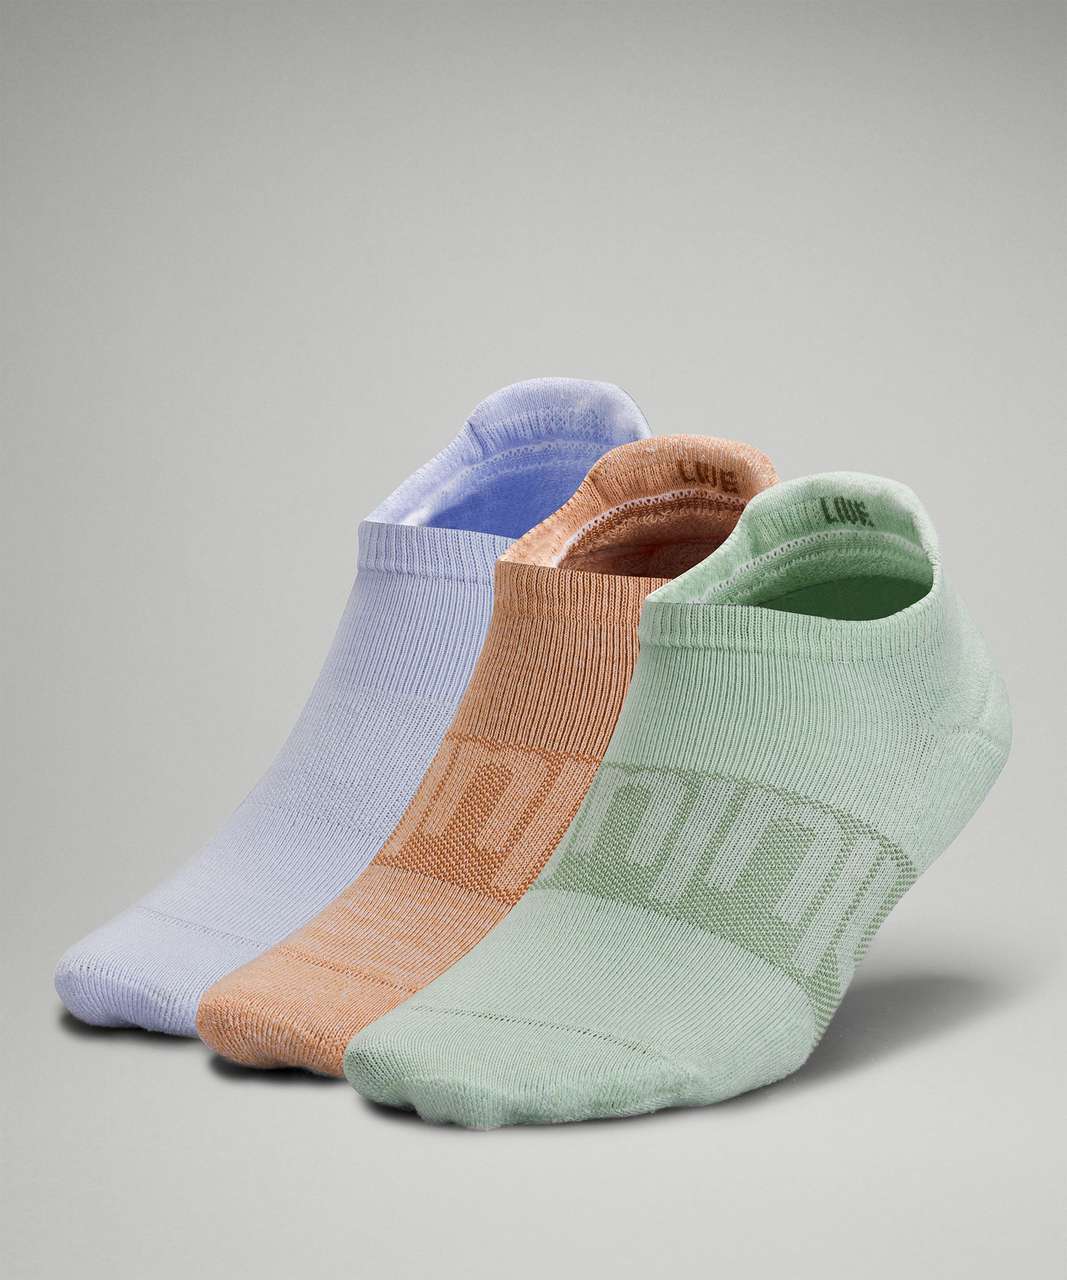 Lululemon Daily Stride Low-Ankle Sock 3 Pack - Creamy Mint / Warm Apricot / Pastel Blue